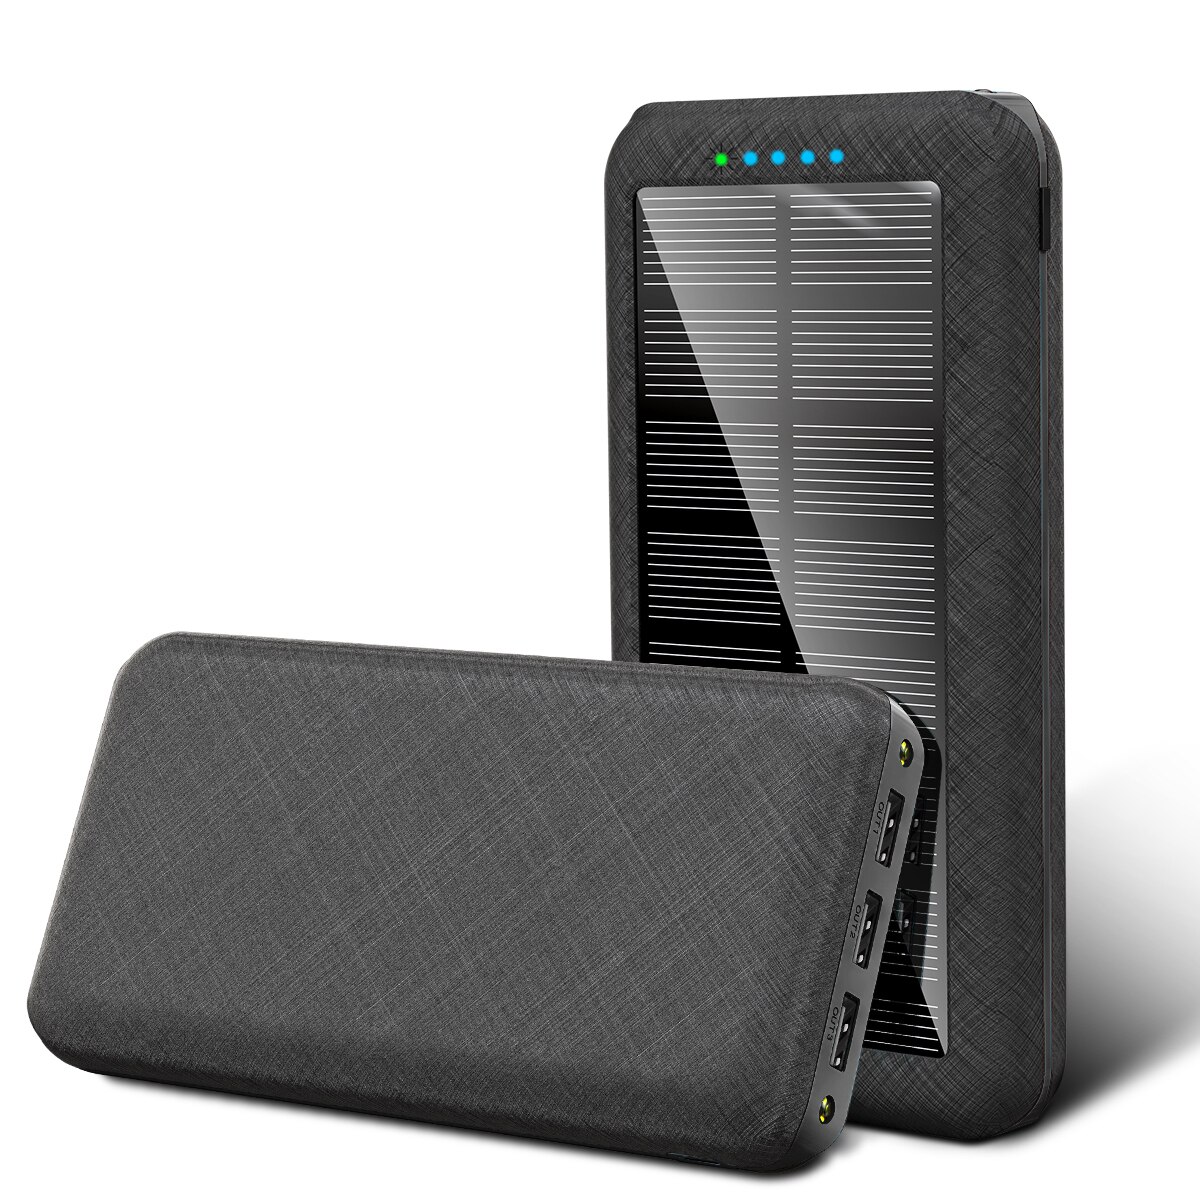 80000mAh Qi Wireless Solar Power Bank for Xiaomi Samsung Iphone Portable Charger 3USB Phone Charger Outdoor Travel PowerBank: Wireless black